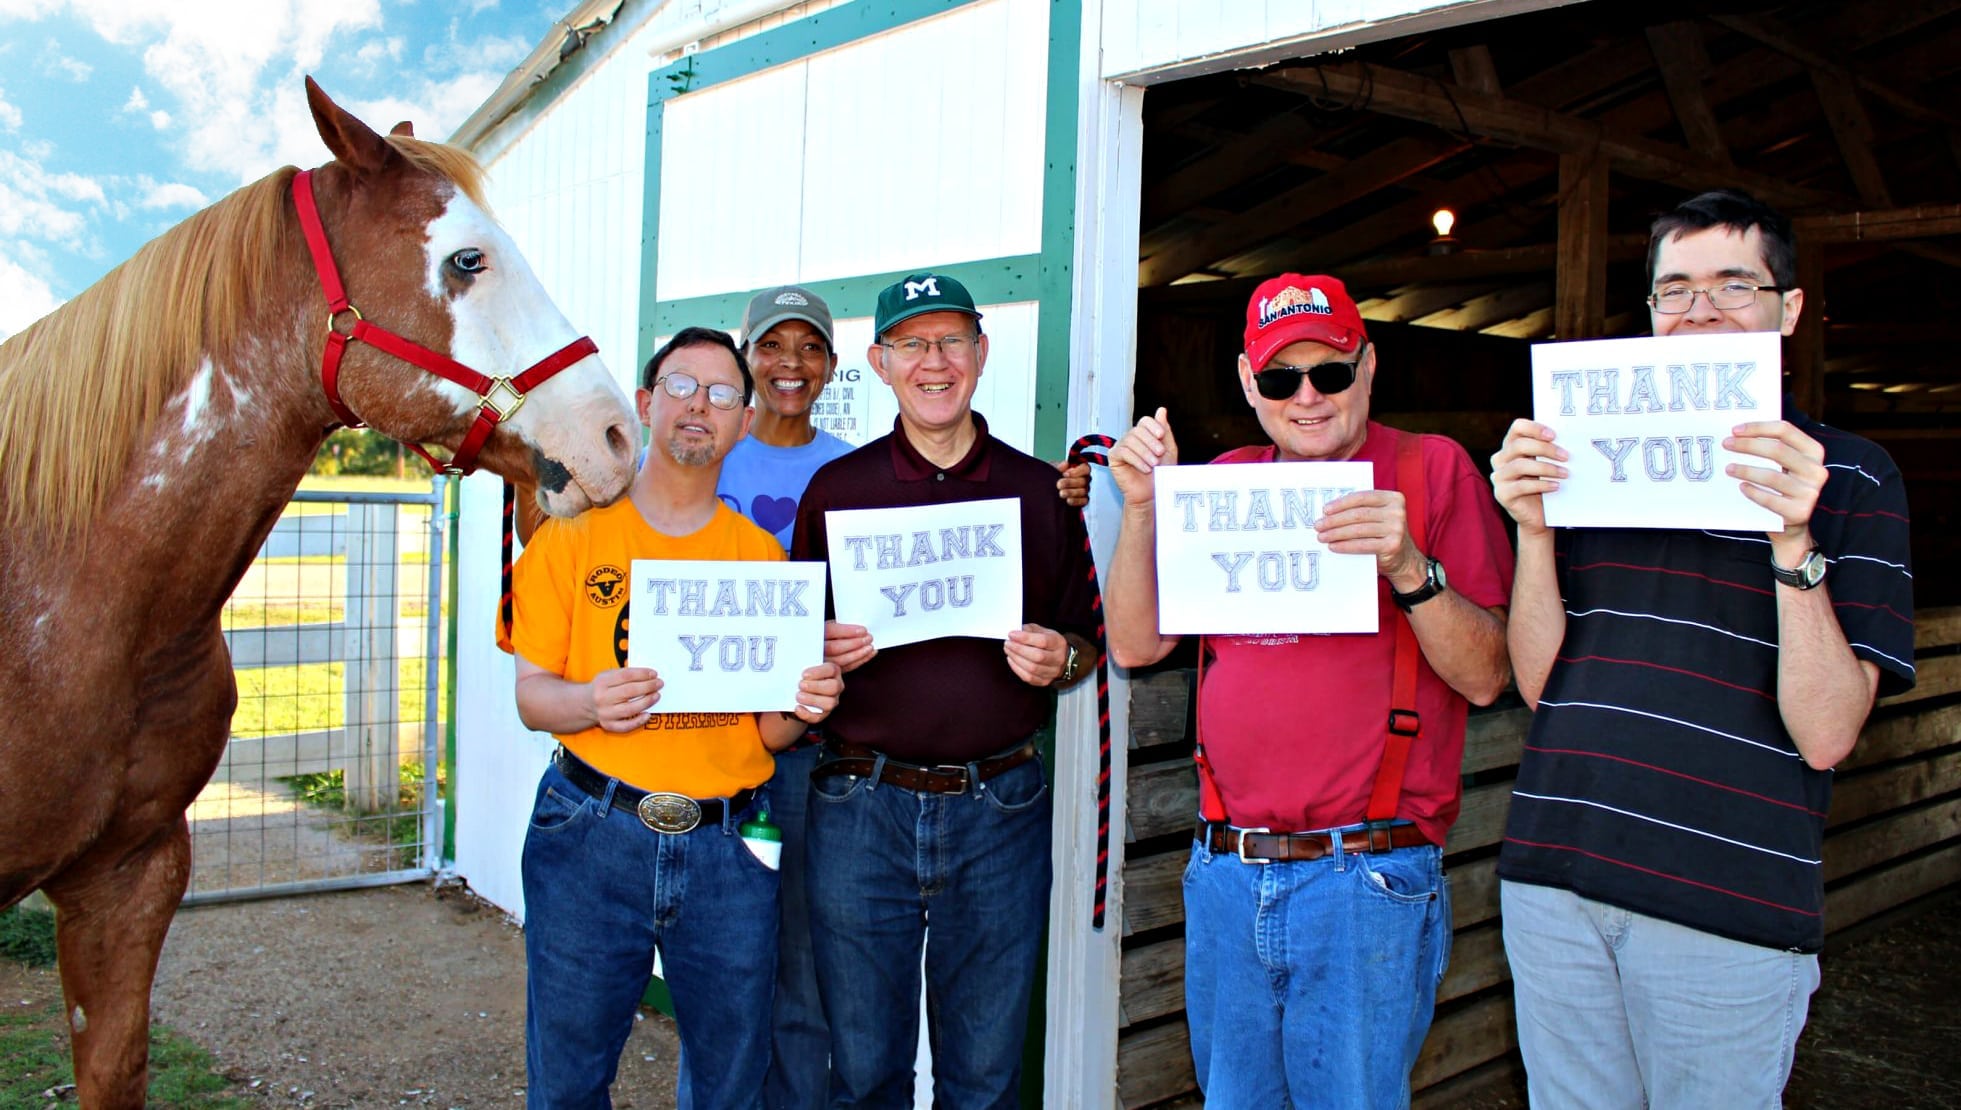 Group of Marbridge Charity members holding up thank you signs by a horse in door of barn